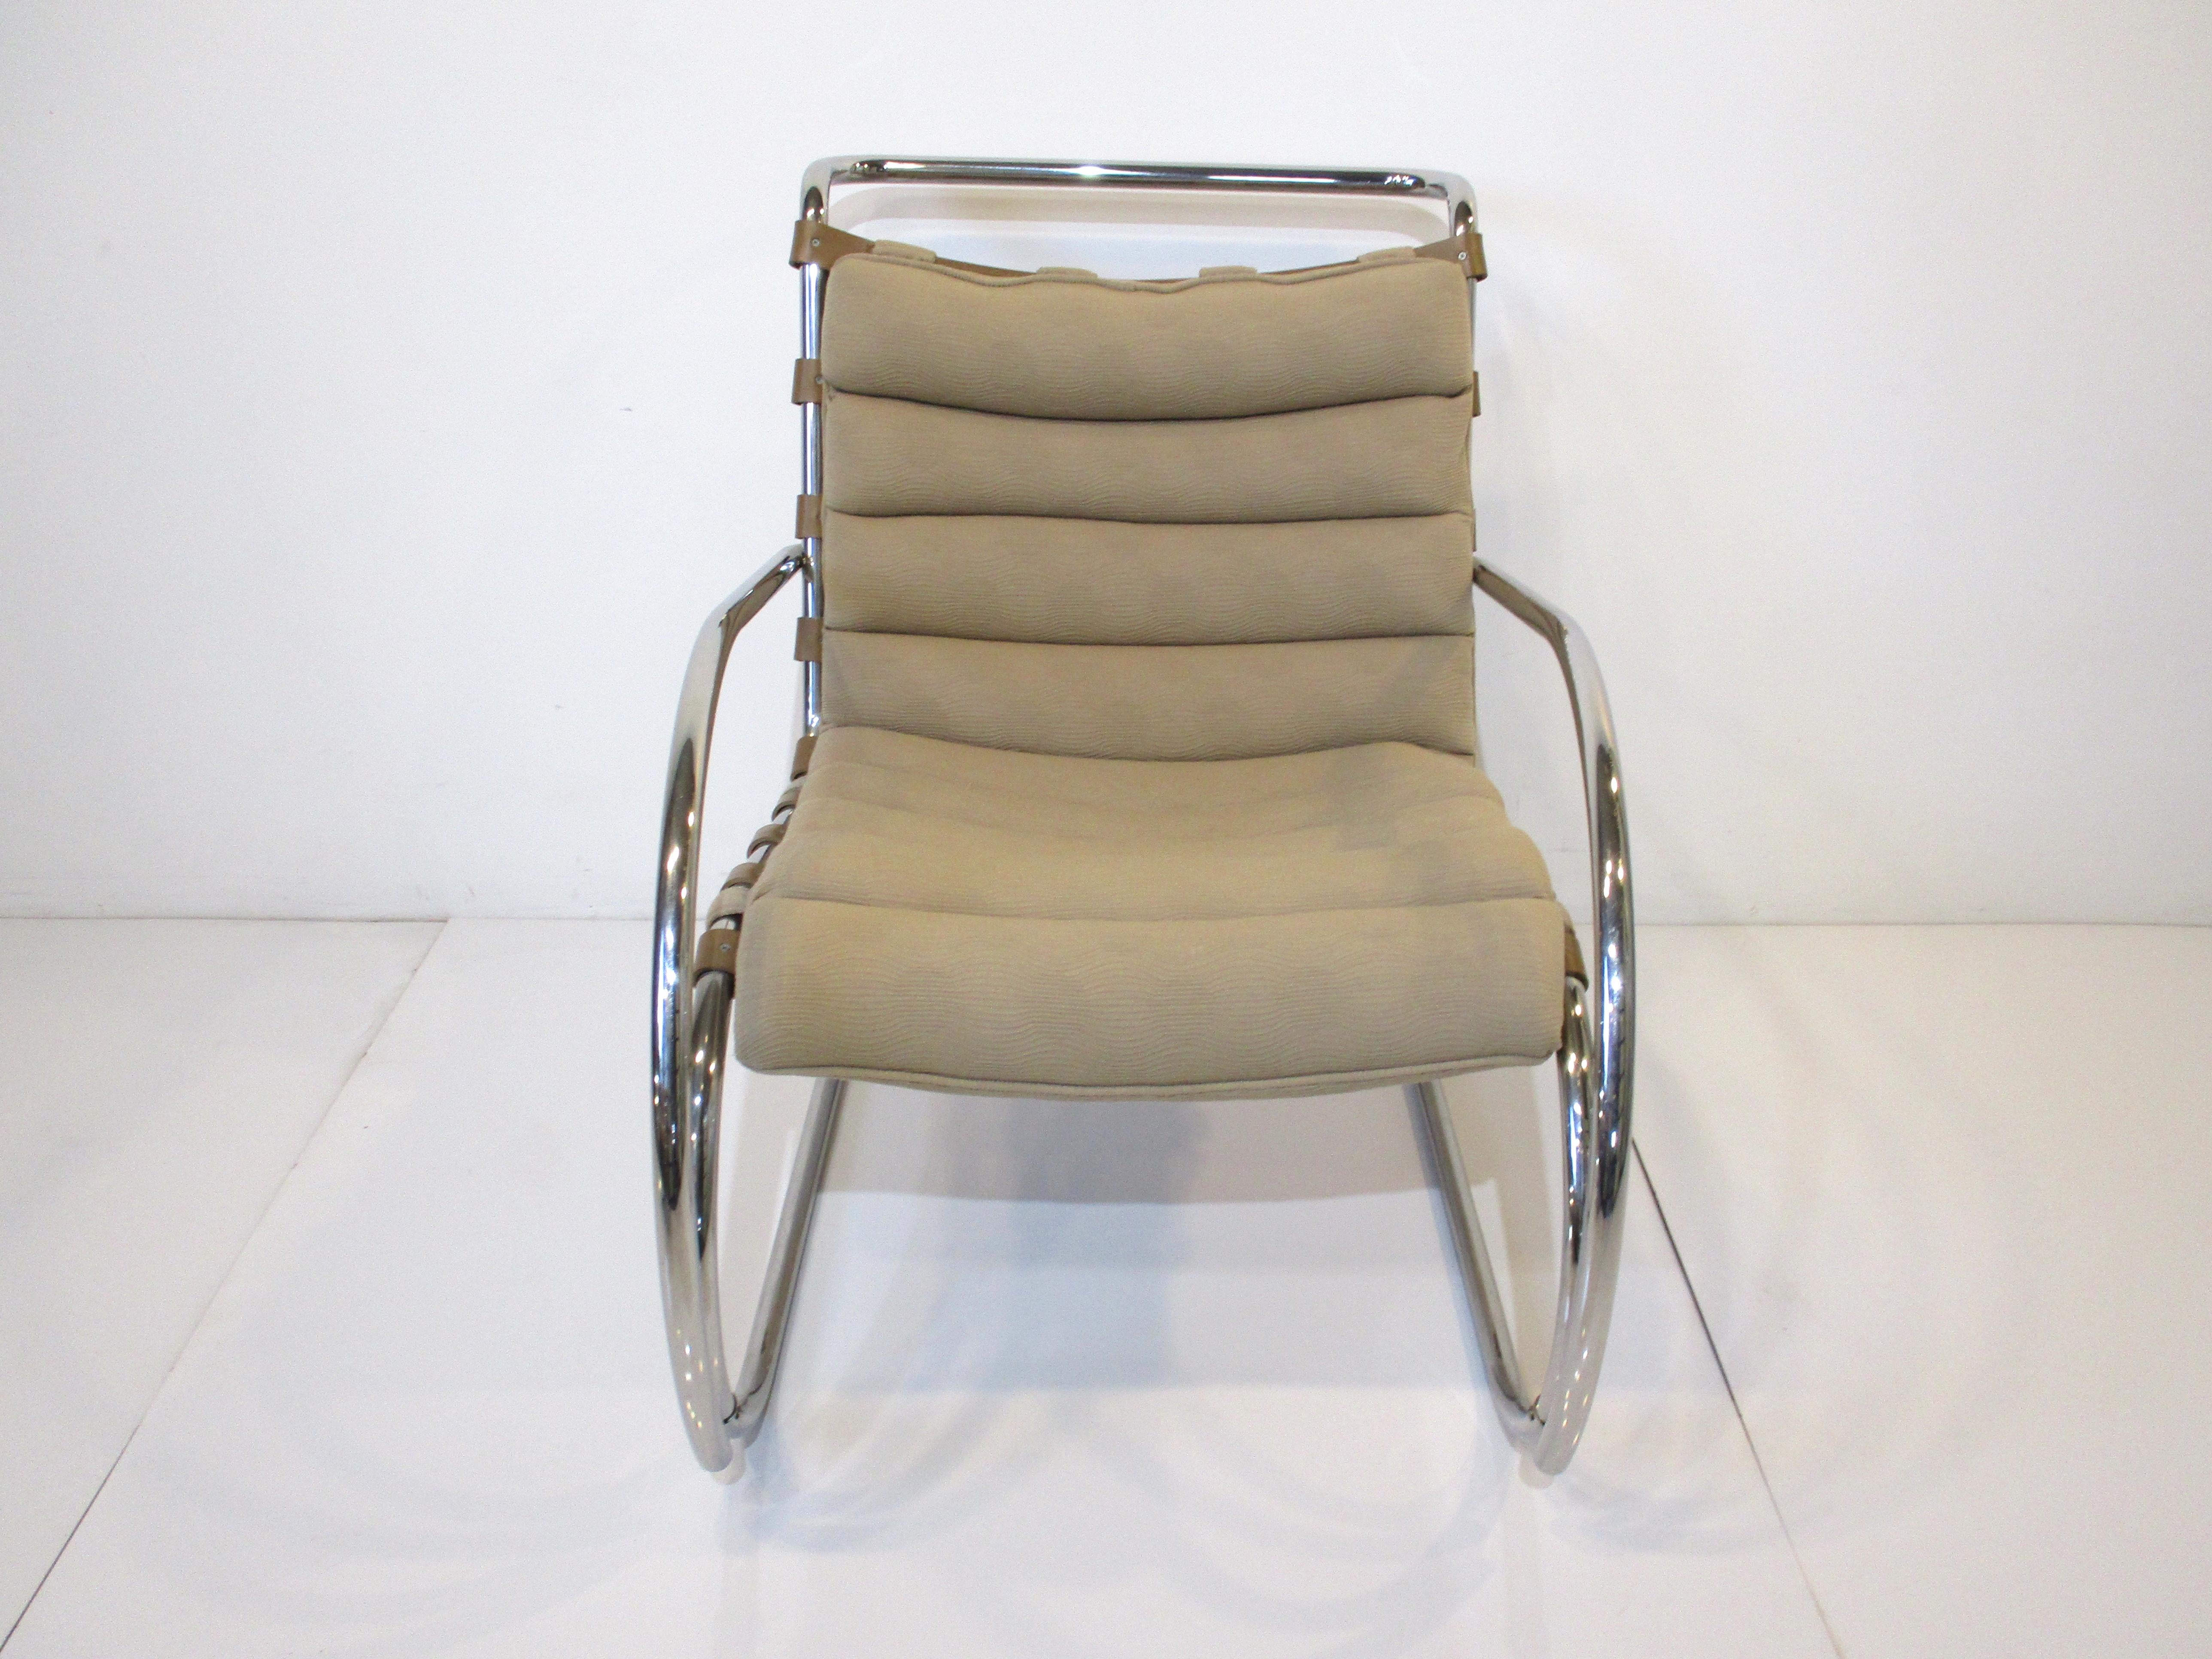 A classic in design the Beaver MR lounge chair in curved chromed tubular metal with thick leather strapping for support and rolled upholstered seat cushion . Manufactured by Knoll International , this chair is as fresh and clean in design and has